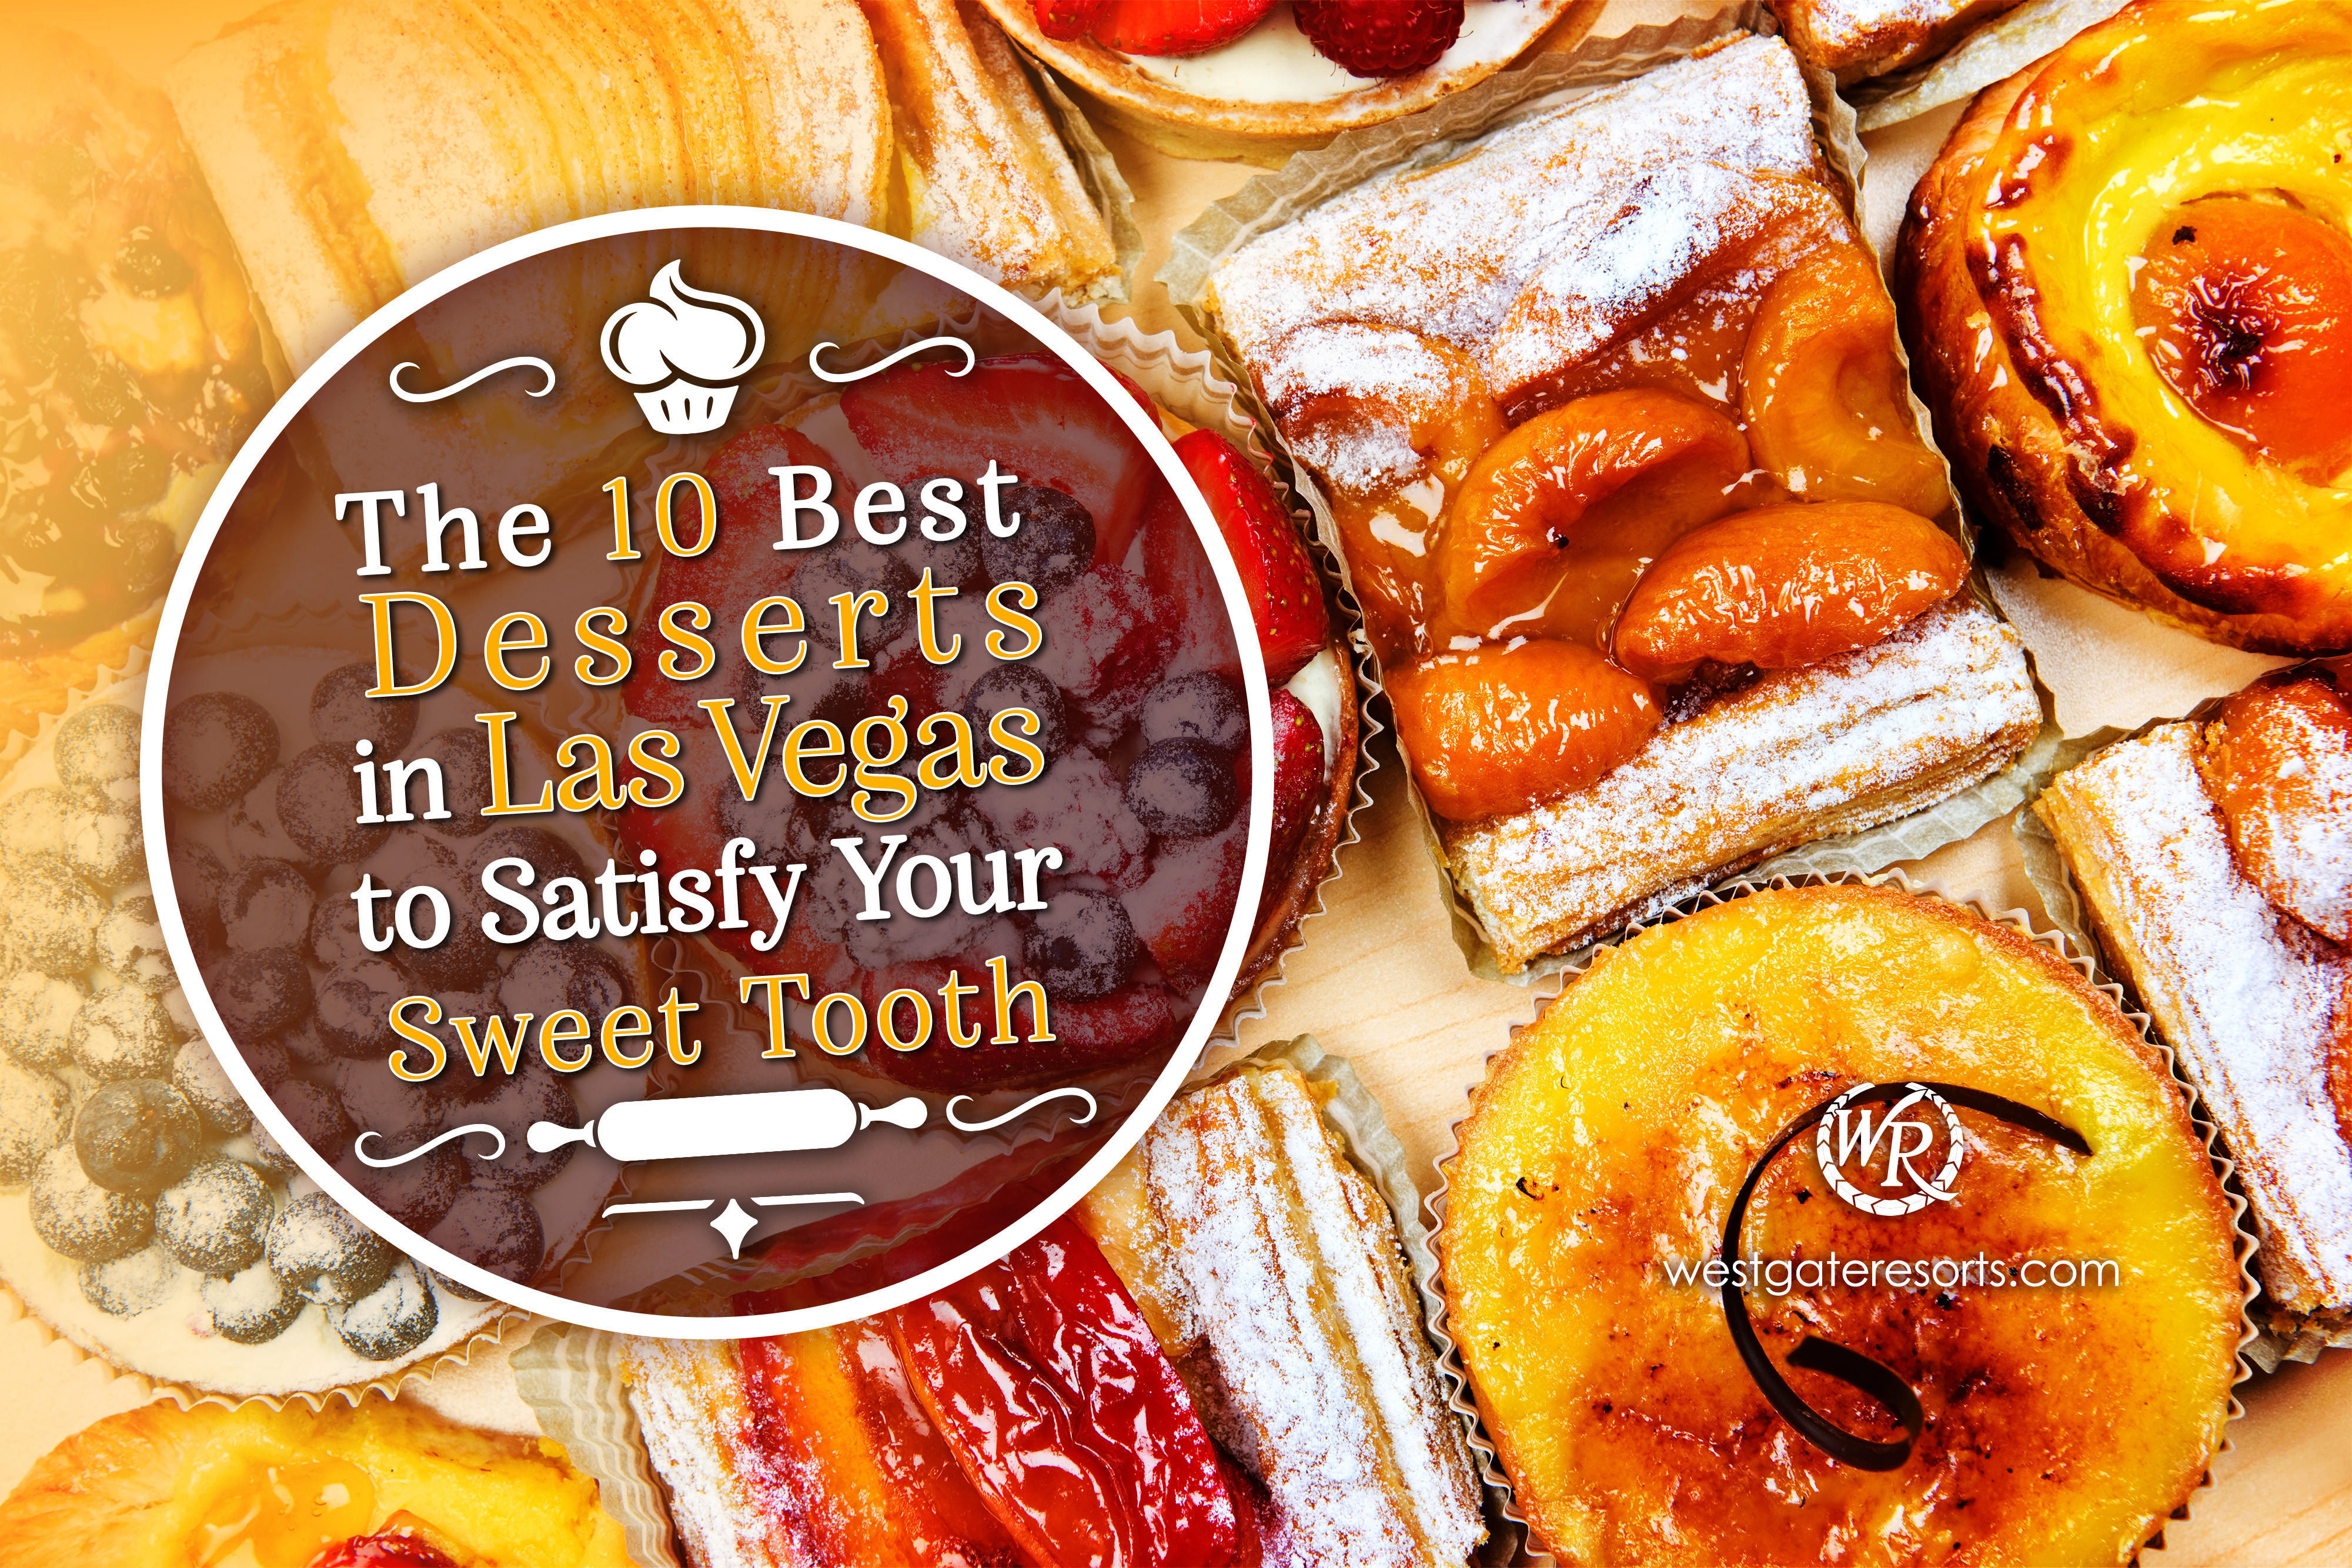 The 10 Best Desserts in Las Vegas to Satisfy Your Sweet Tooth